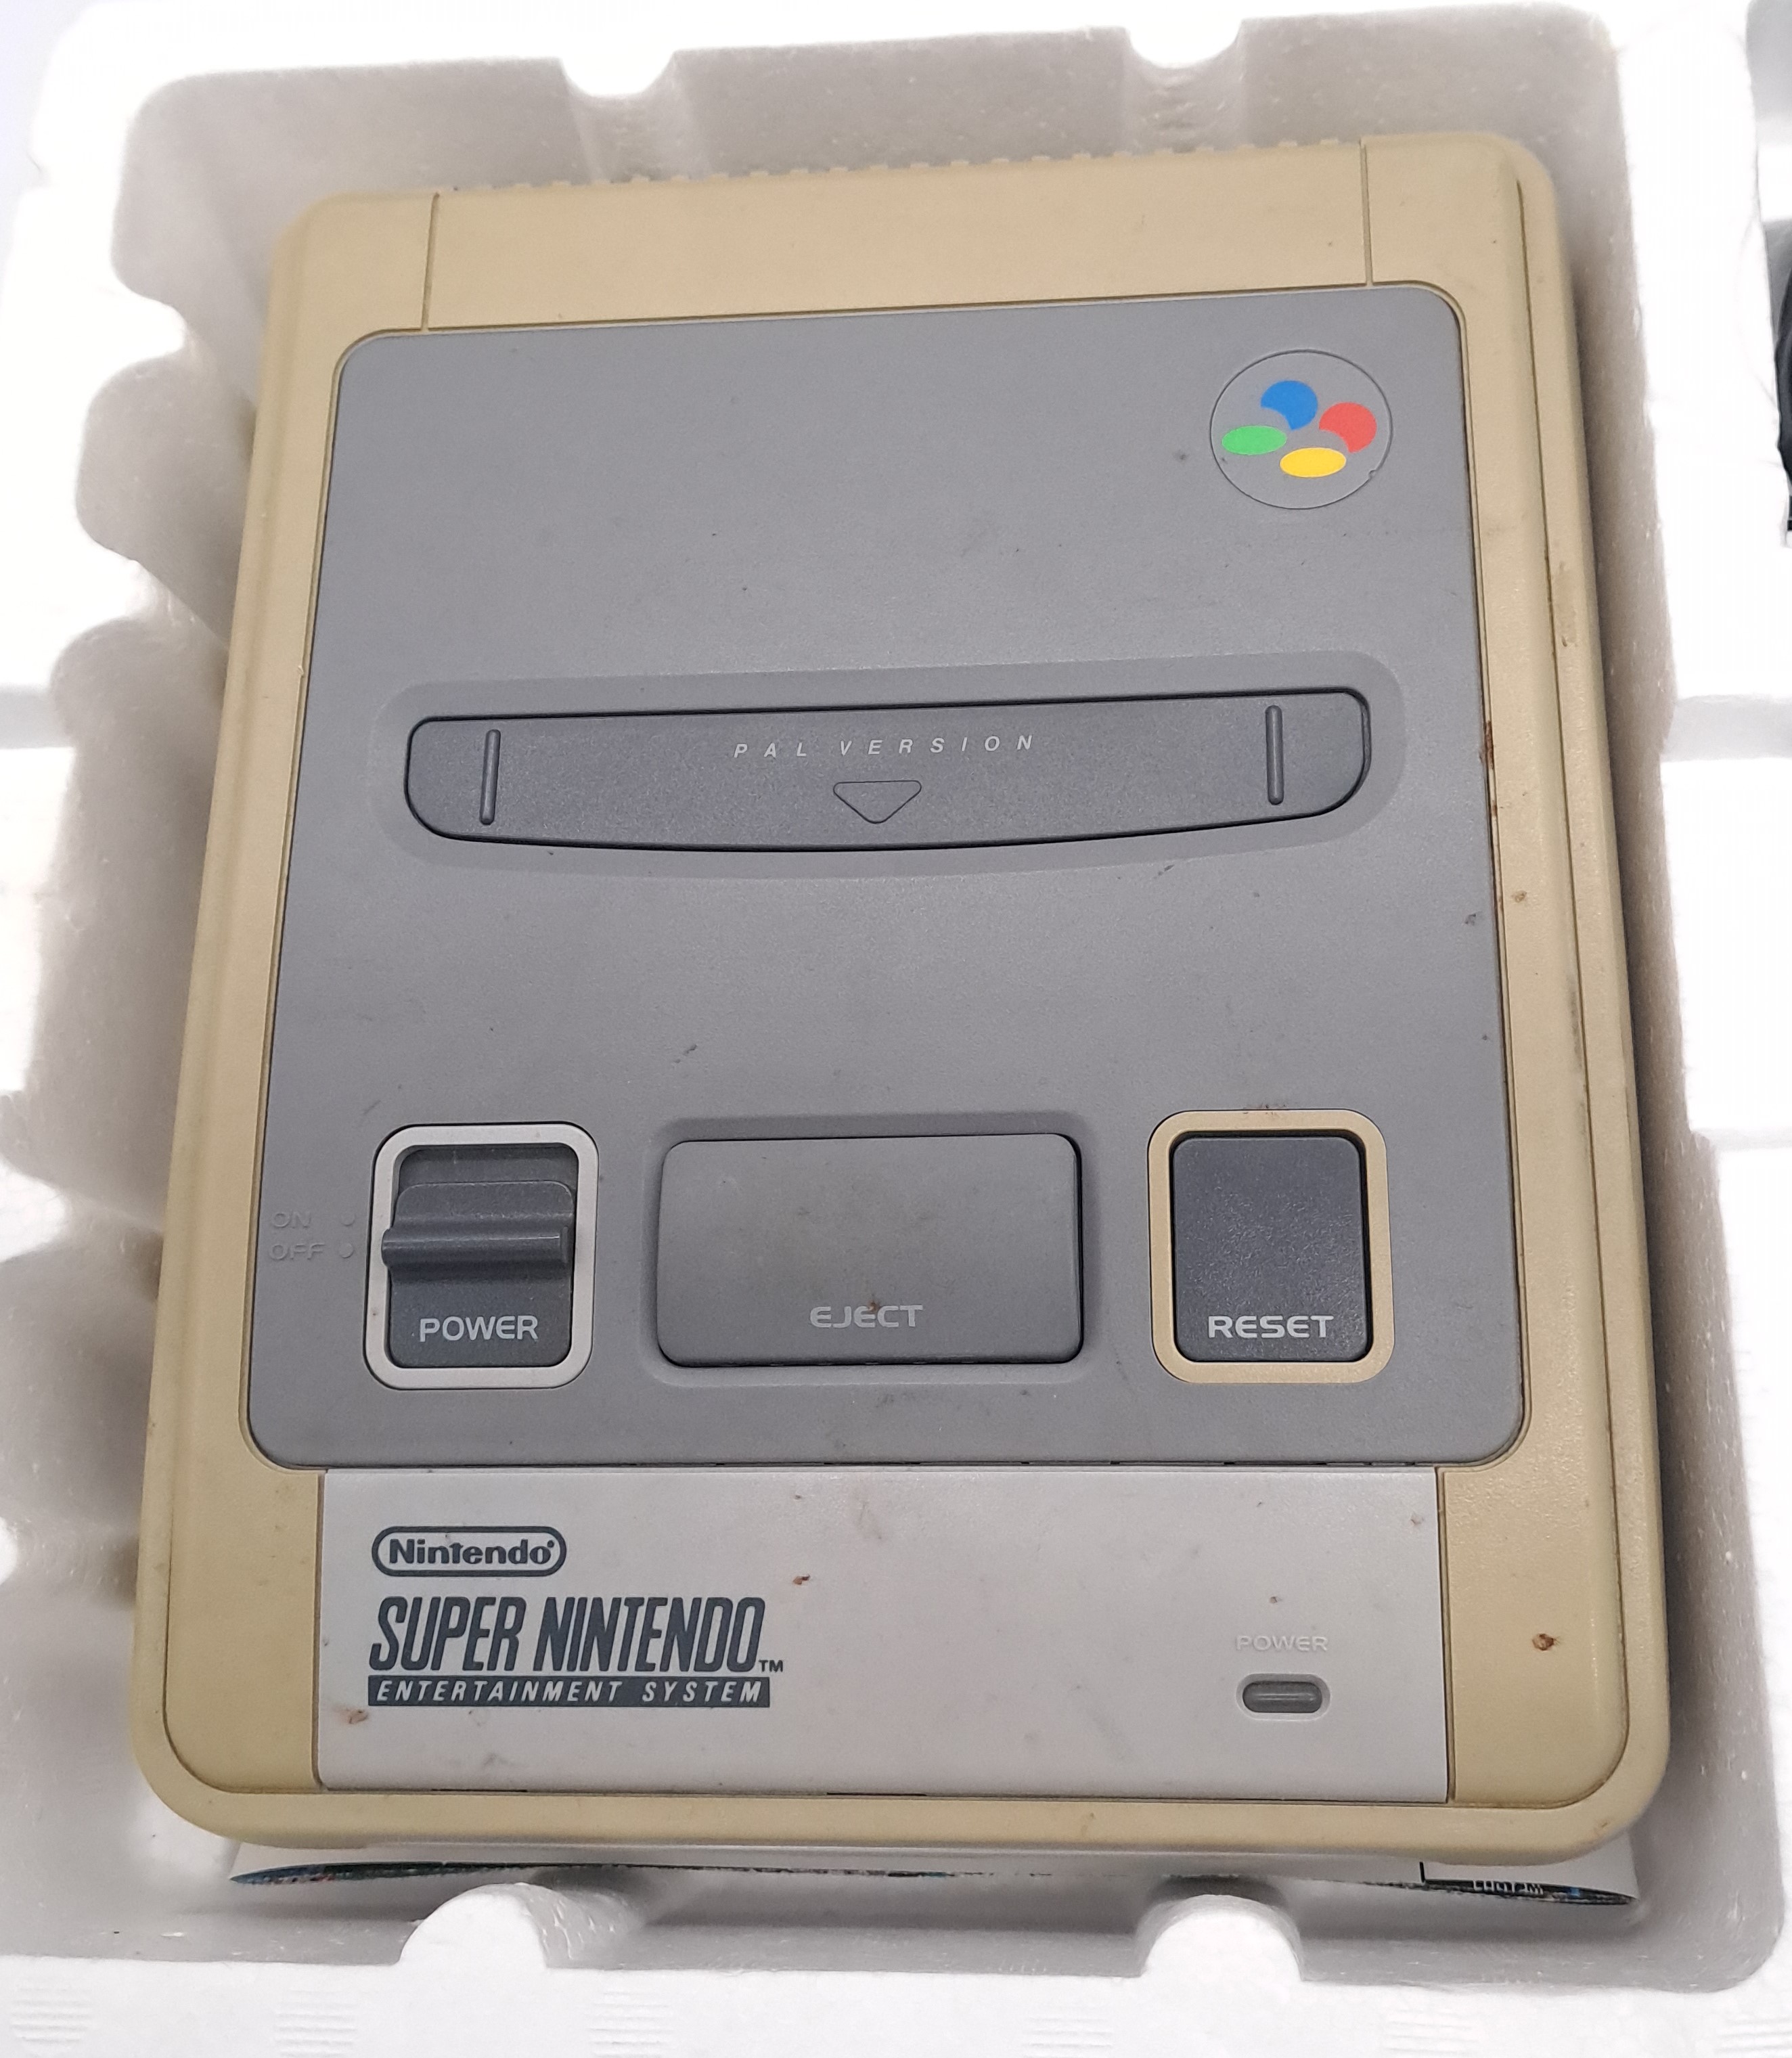 Super Nintendo, a boxed STARWING FX Entertainment System - Image 2 of 3